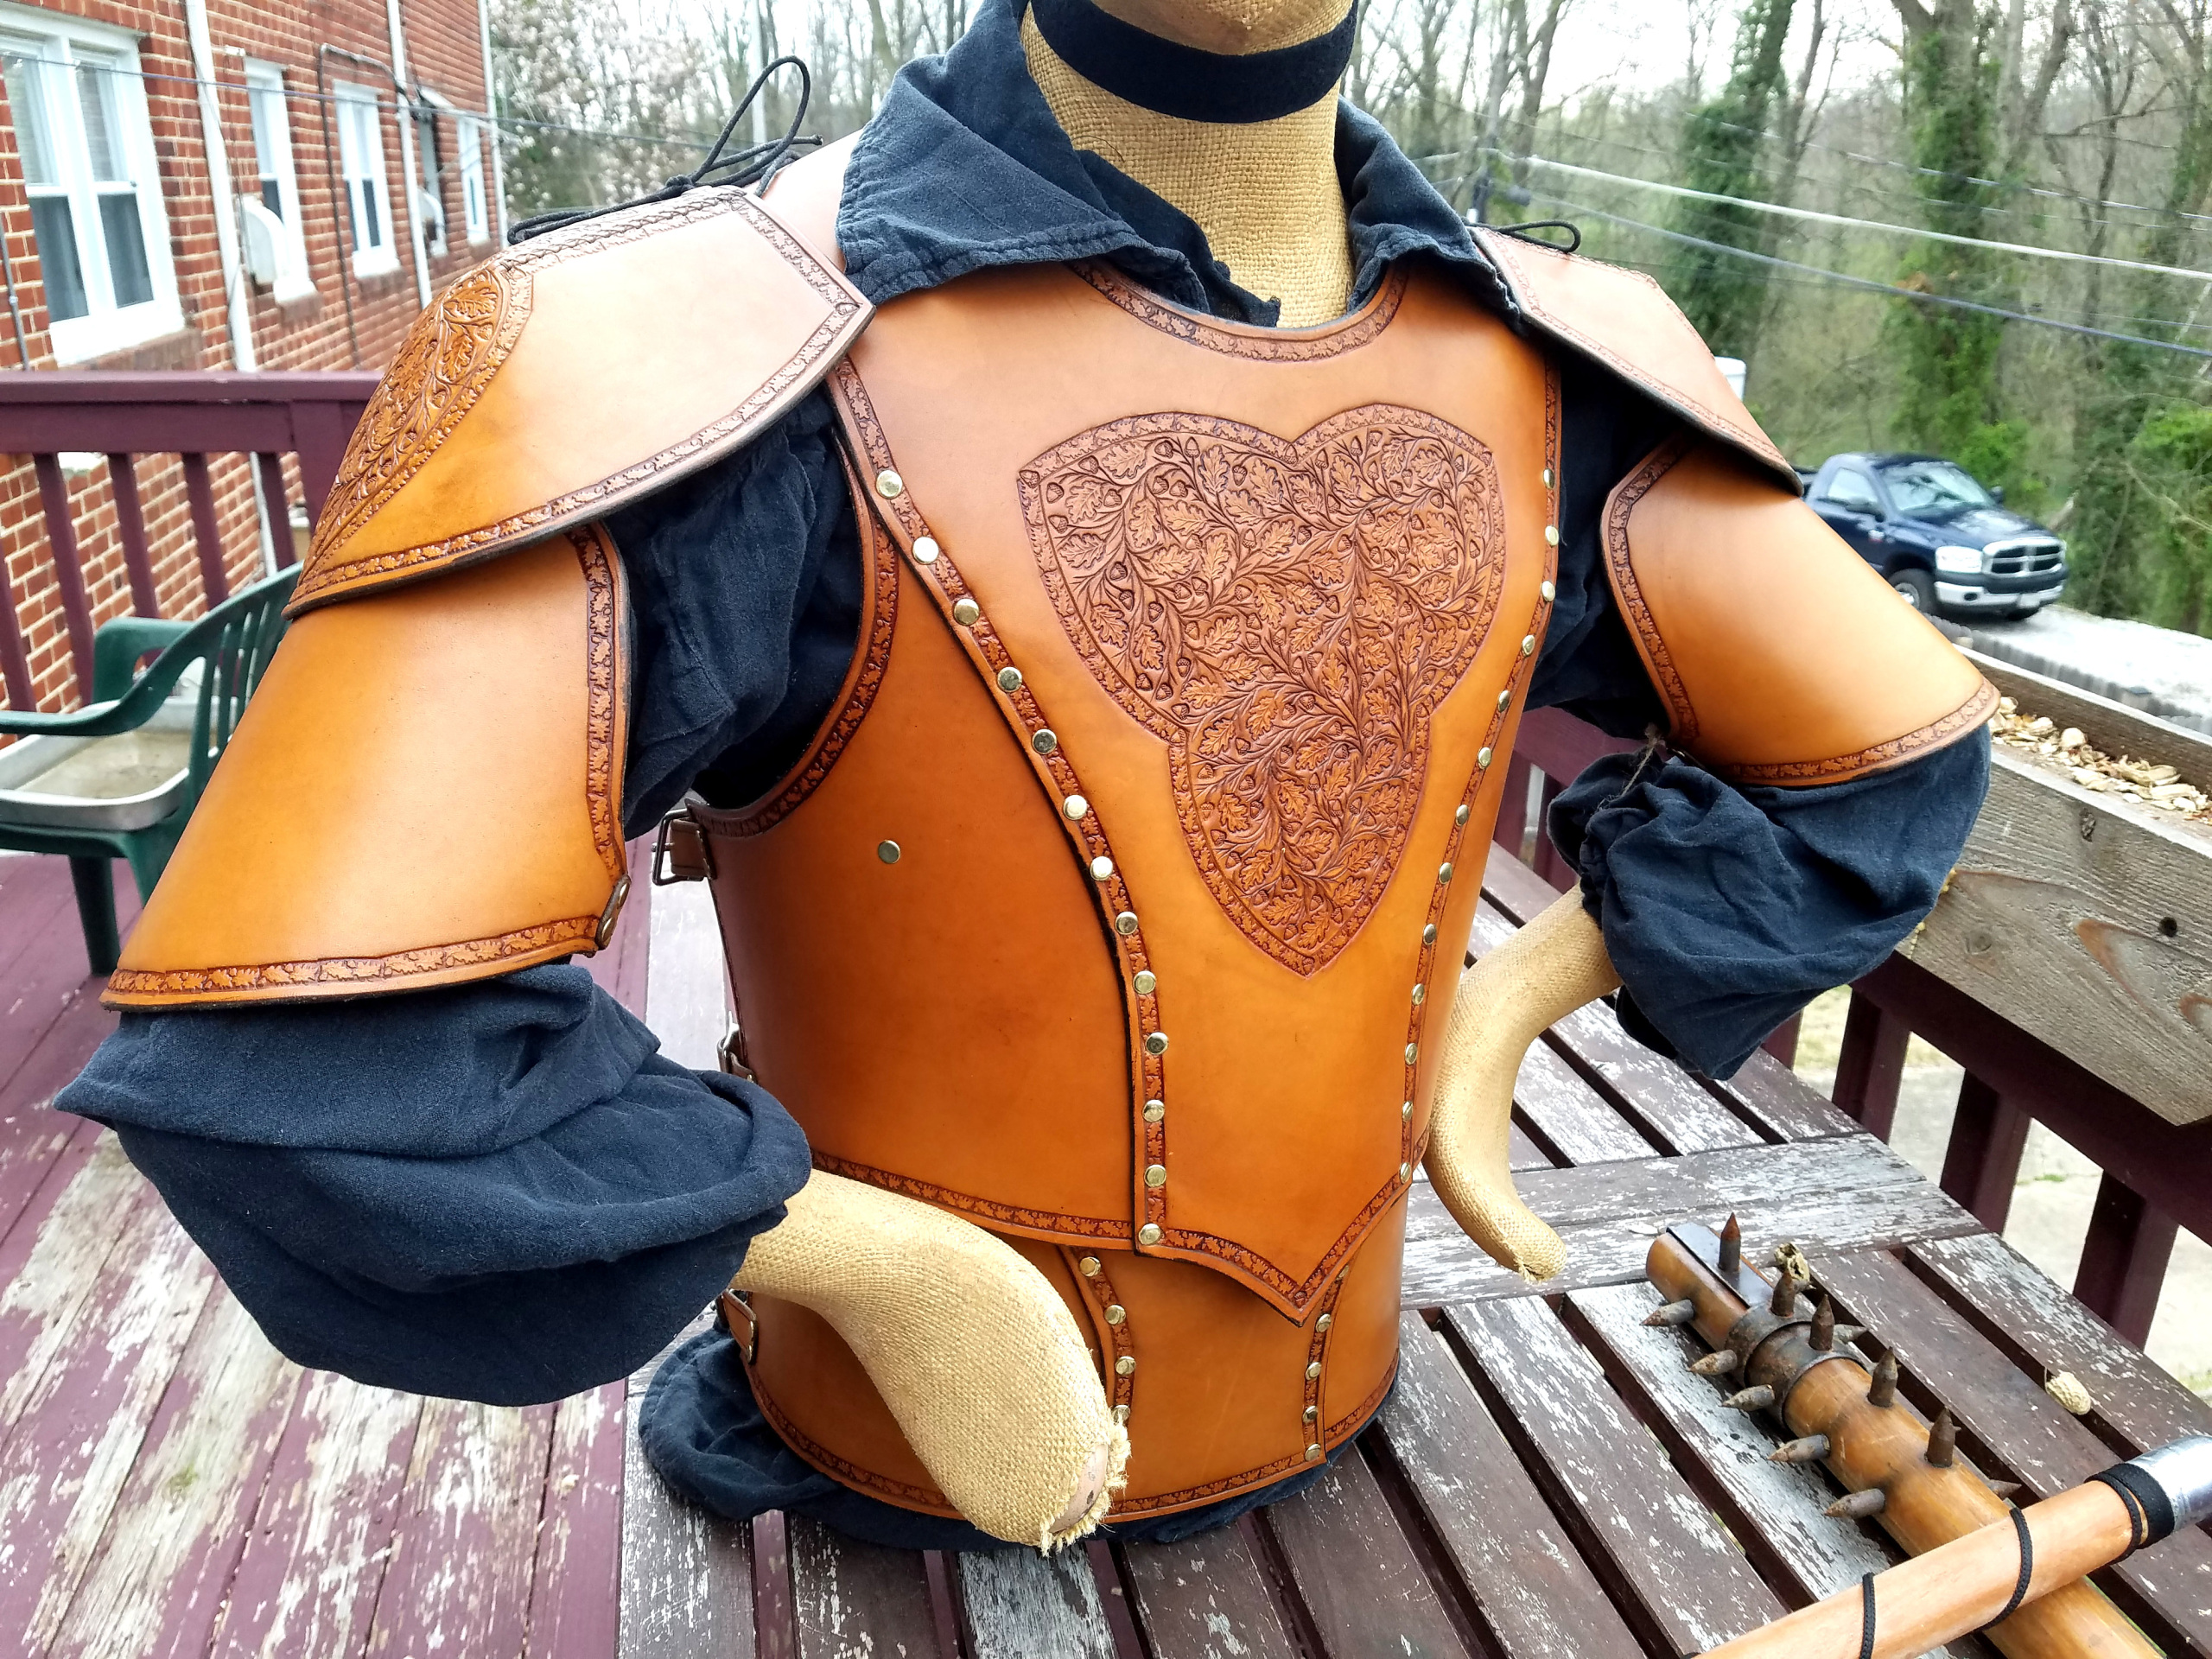 Bra Breast Plate Armour, ruthjohnsoncreations